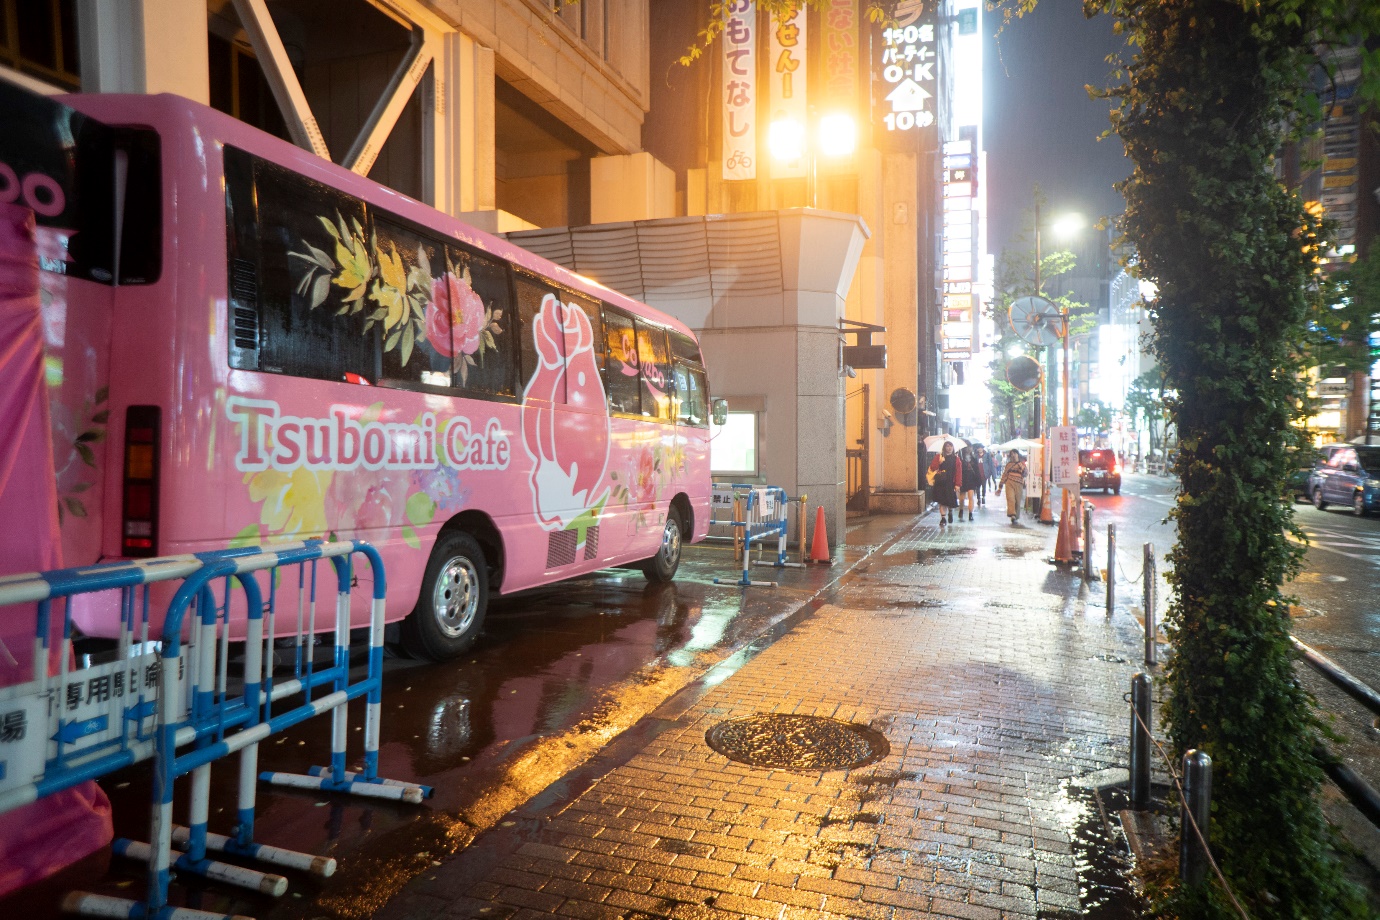 Tsubomi Cafe stops every two weeks from 6 p.m. to 10 p.m. in downtown Tokyo, including Shibuya or Shinjuku, to support victims of sexual  and domestic violence @ Colabo